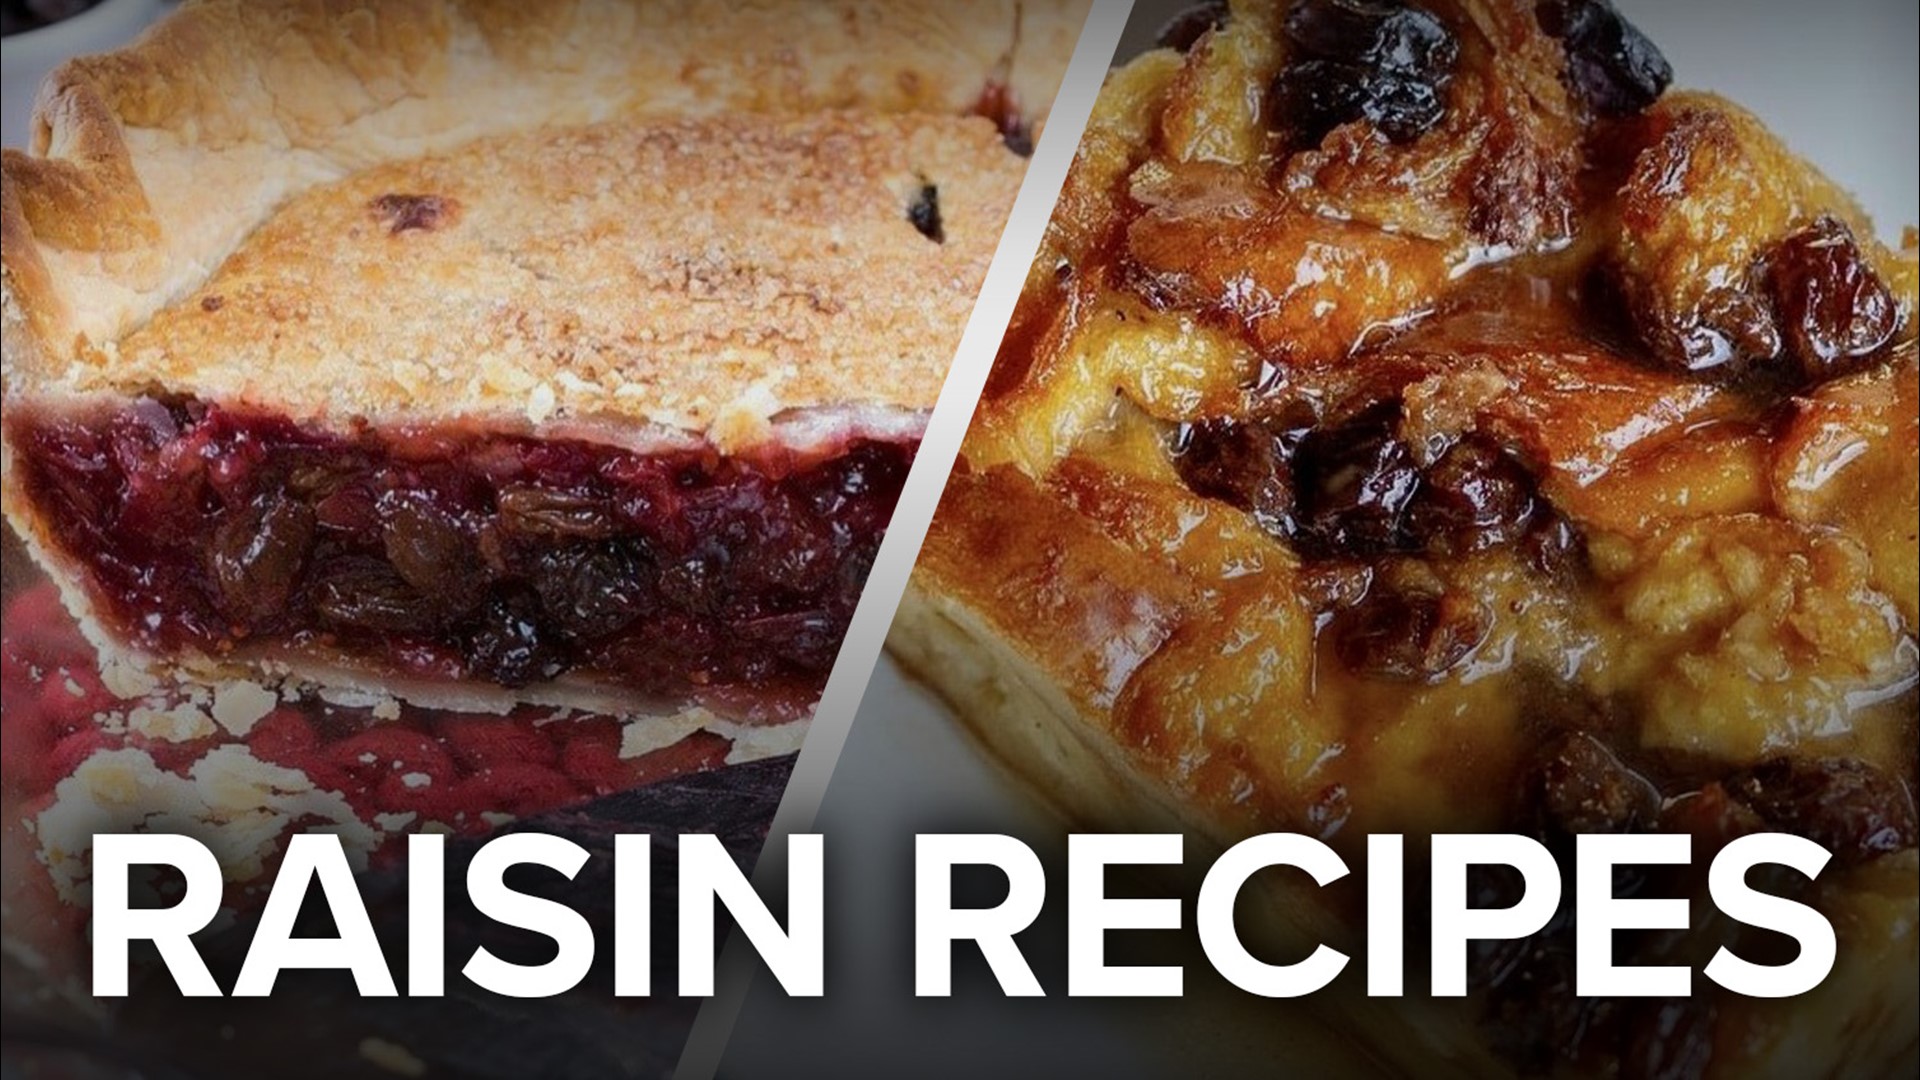 Done right, raisins just add the perfect sweetness.